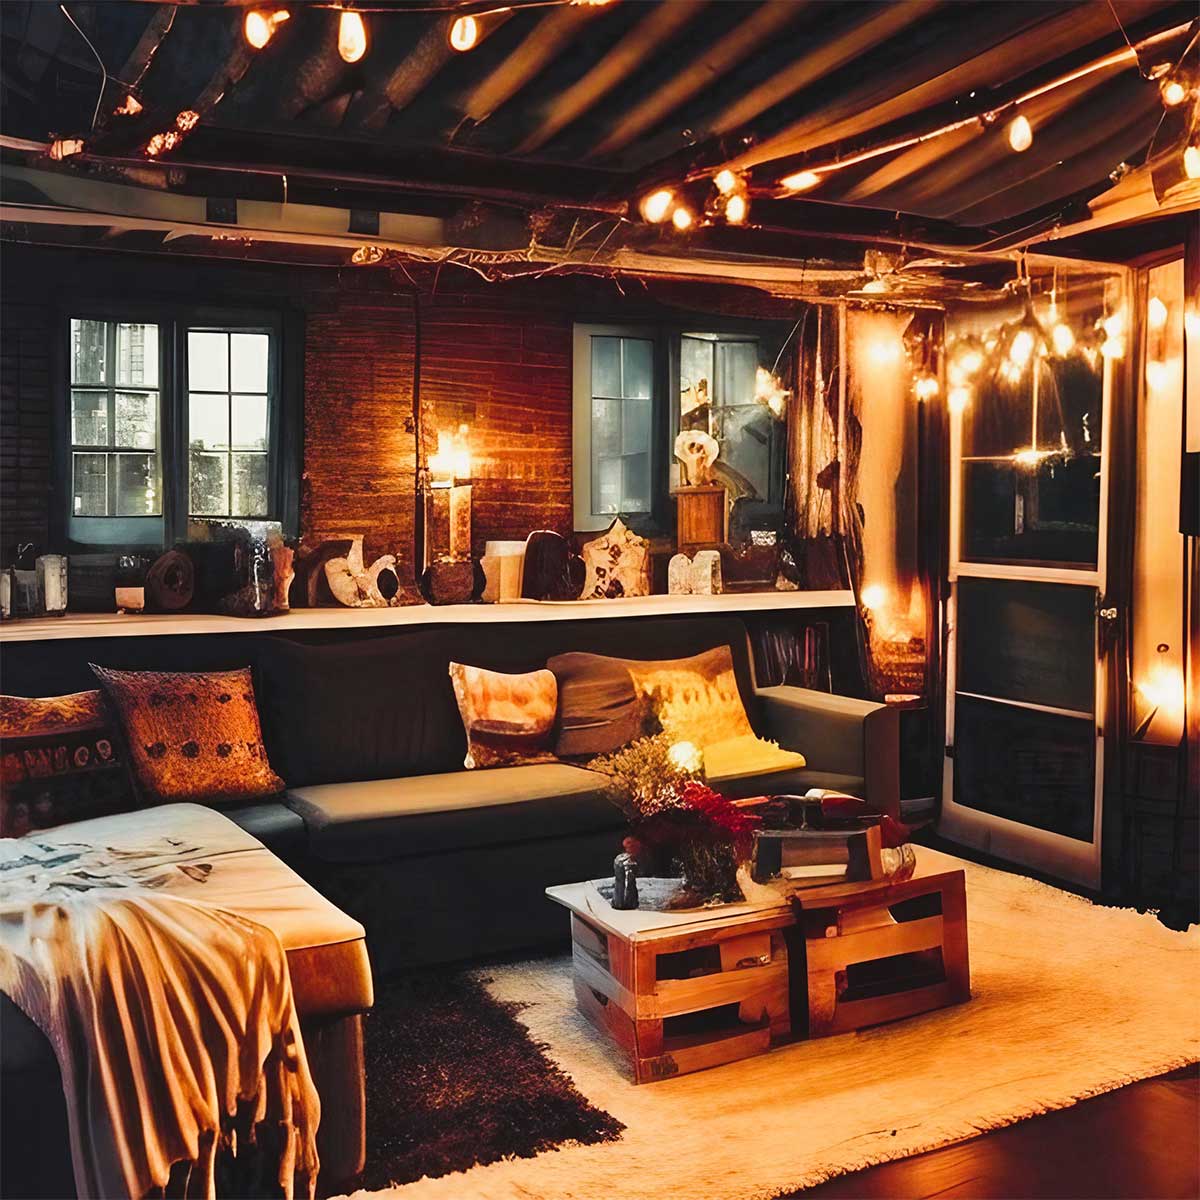 Junkyard chic living room in dark colors with warm and cozy lighting.